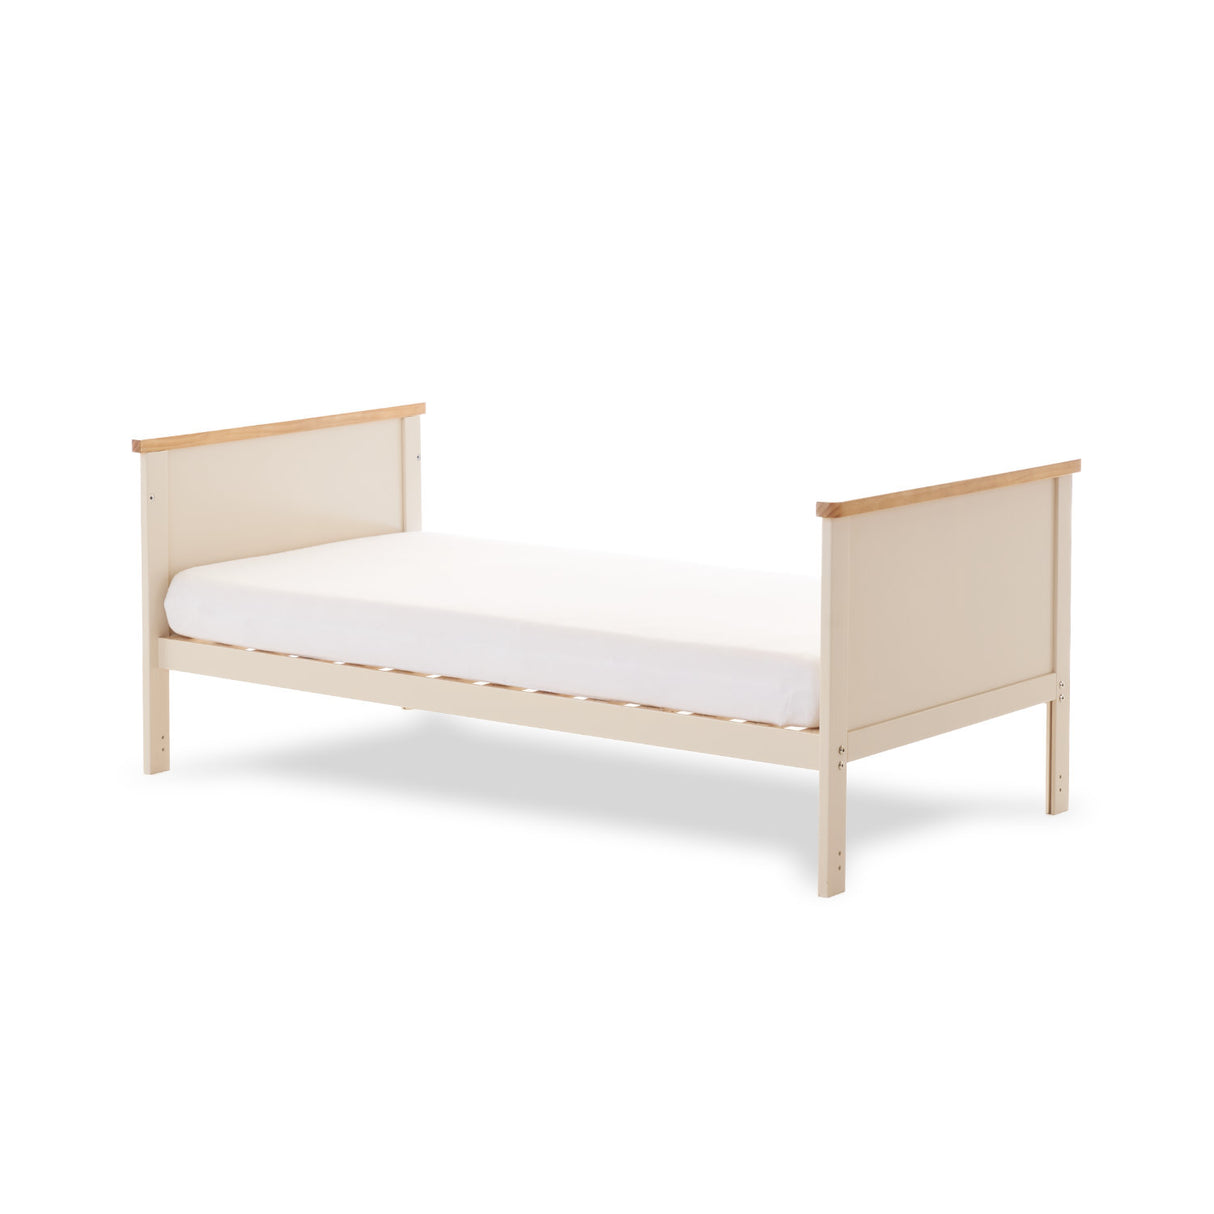 Evie Cot Bed - Cashmere